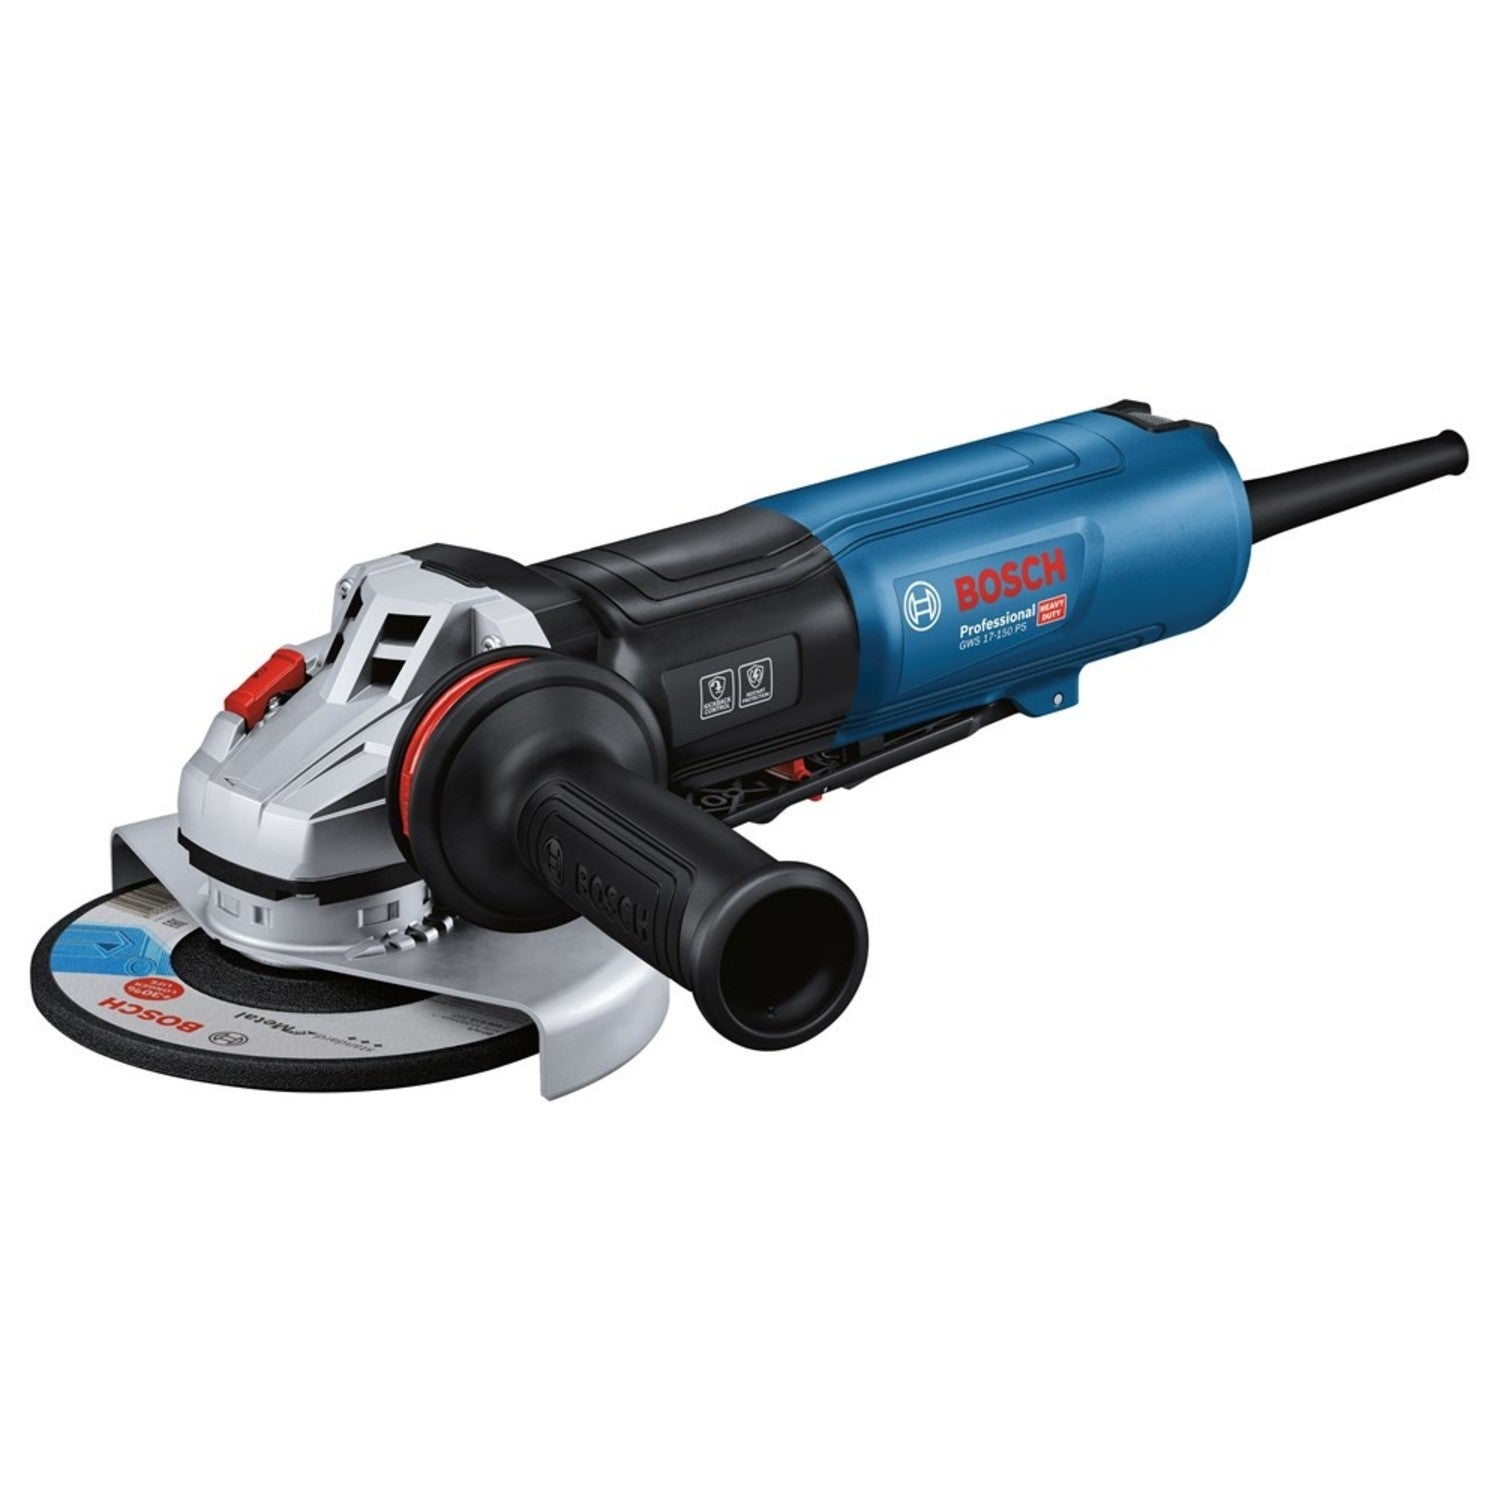 Bosch Professional Angle Grinder GWS 17-150 PS 06017D1600 Power Tool Services